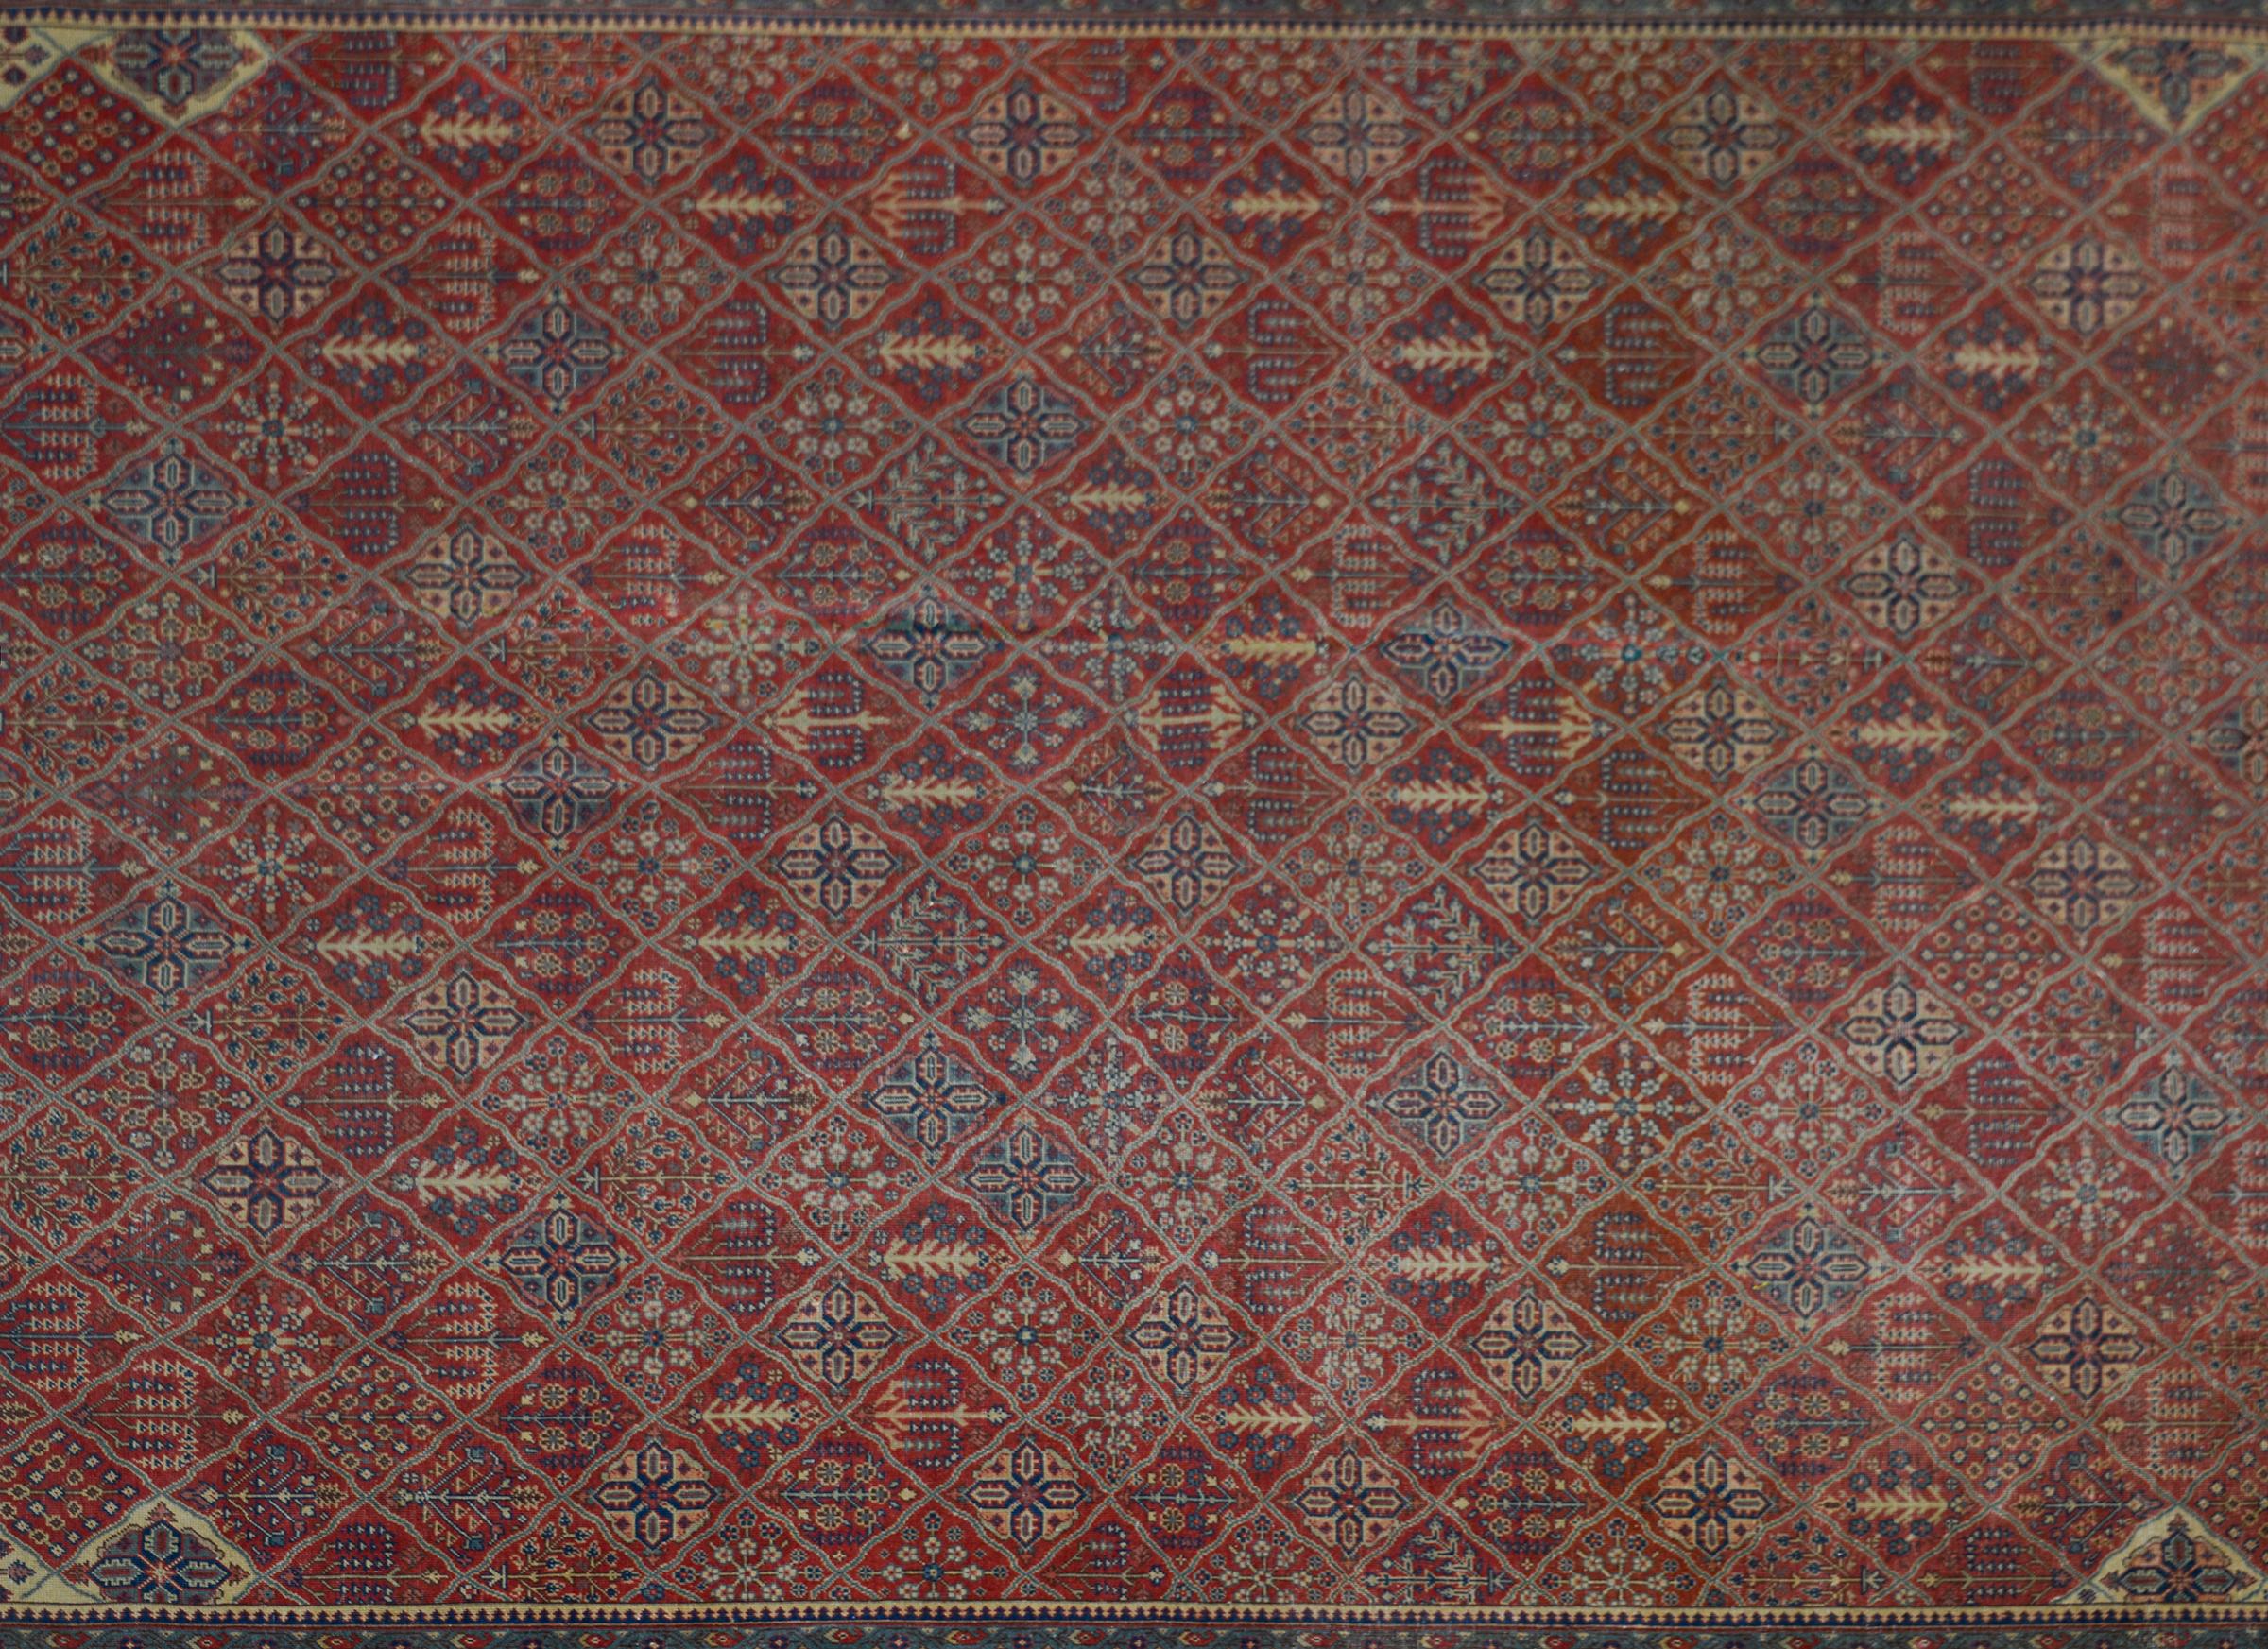 An early 20th century Turkish Sivas rug with the most wonderful woven patchwork and trellis pattern containing myriad trees-of-life and flowers all woven in light and dark indigo, cream and pink, and set against a crimson background. The border is